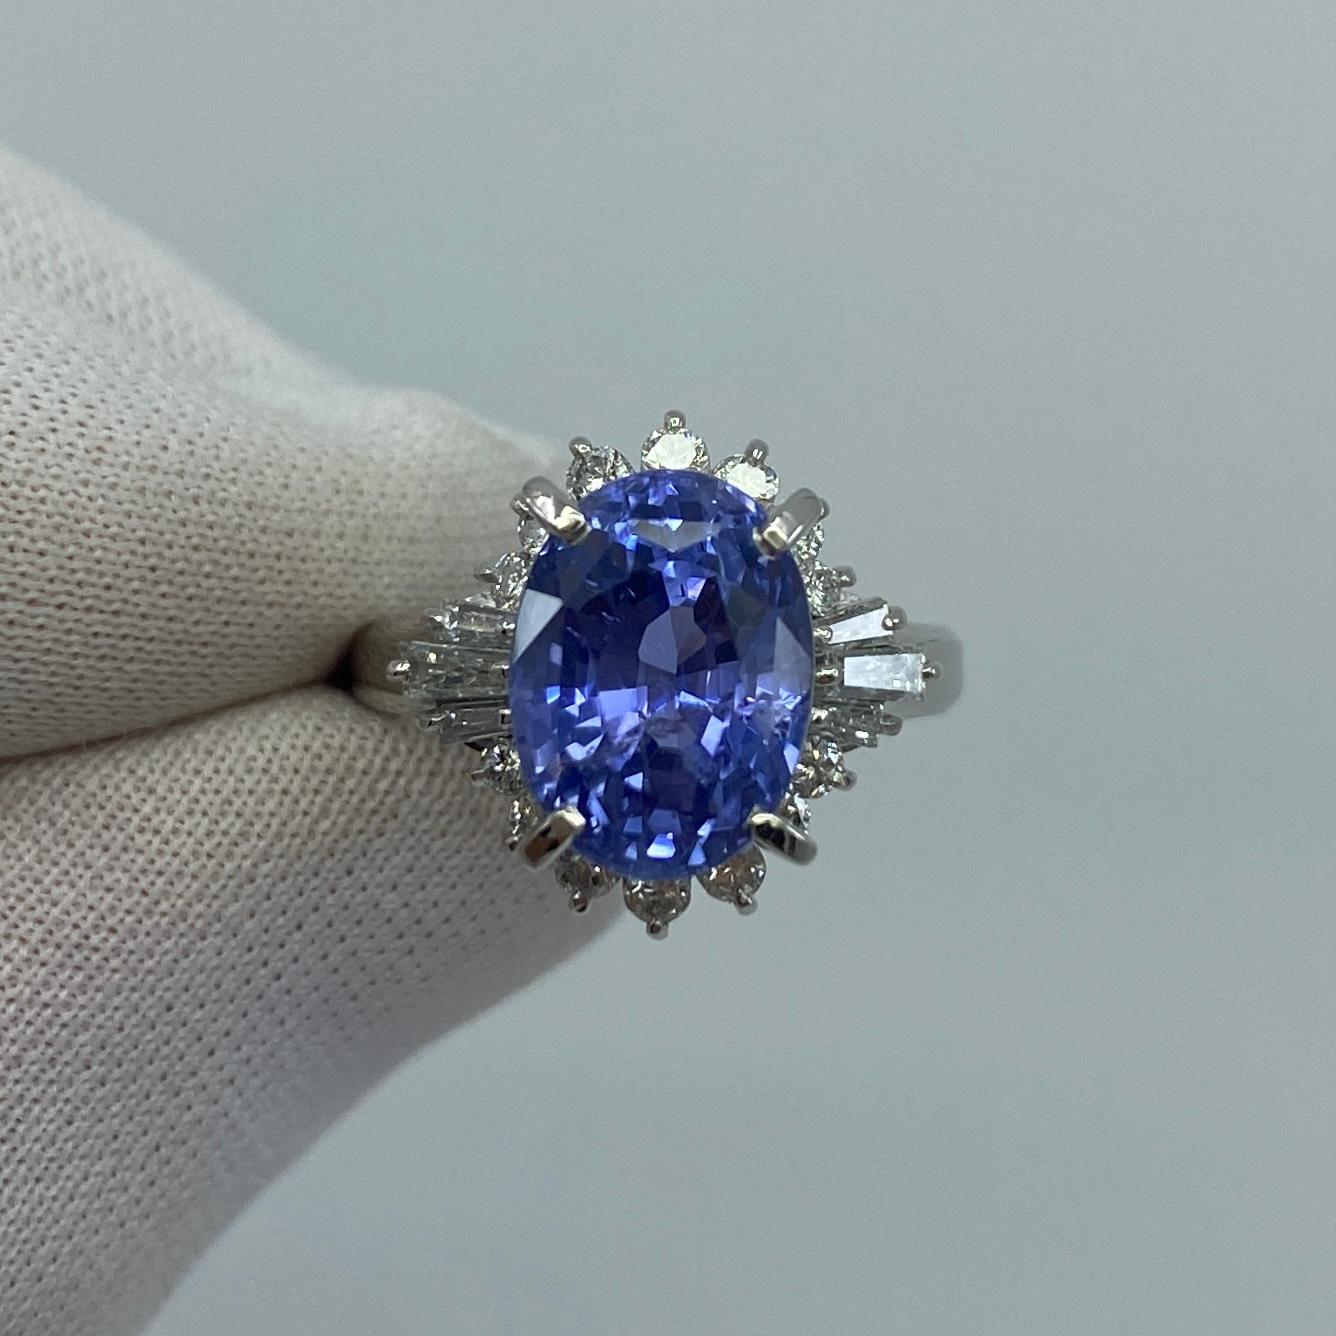 Rare Colour Change Sapphire And Diamond Platinum Ring.

Unique 6.51ct colour change sapphire. Fully certified by GIA, confirming stone as untreated and having colour change effect.
Changes colour from a violet-blue in white light/daylight to purple